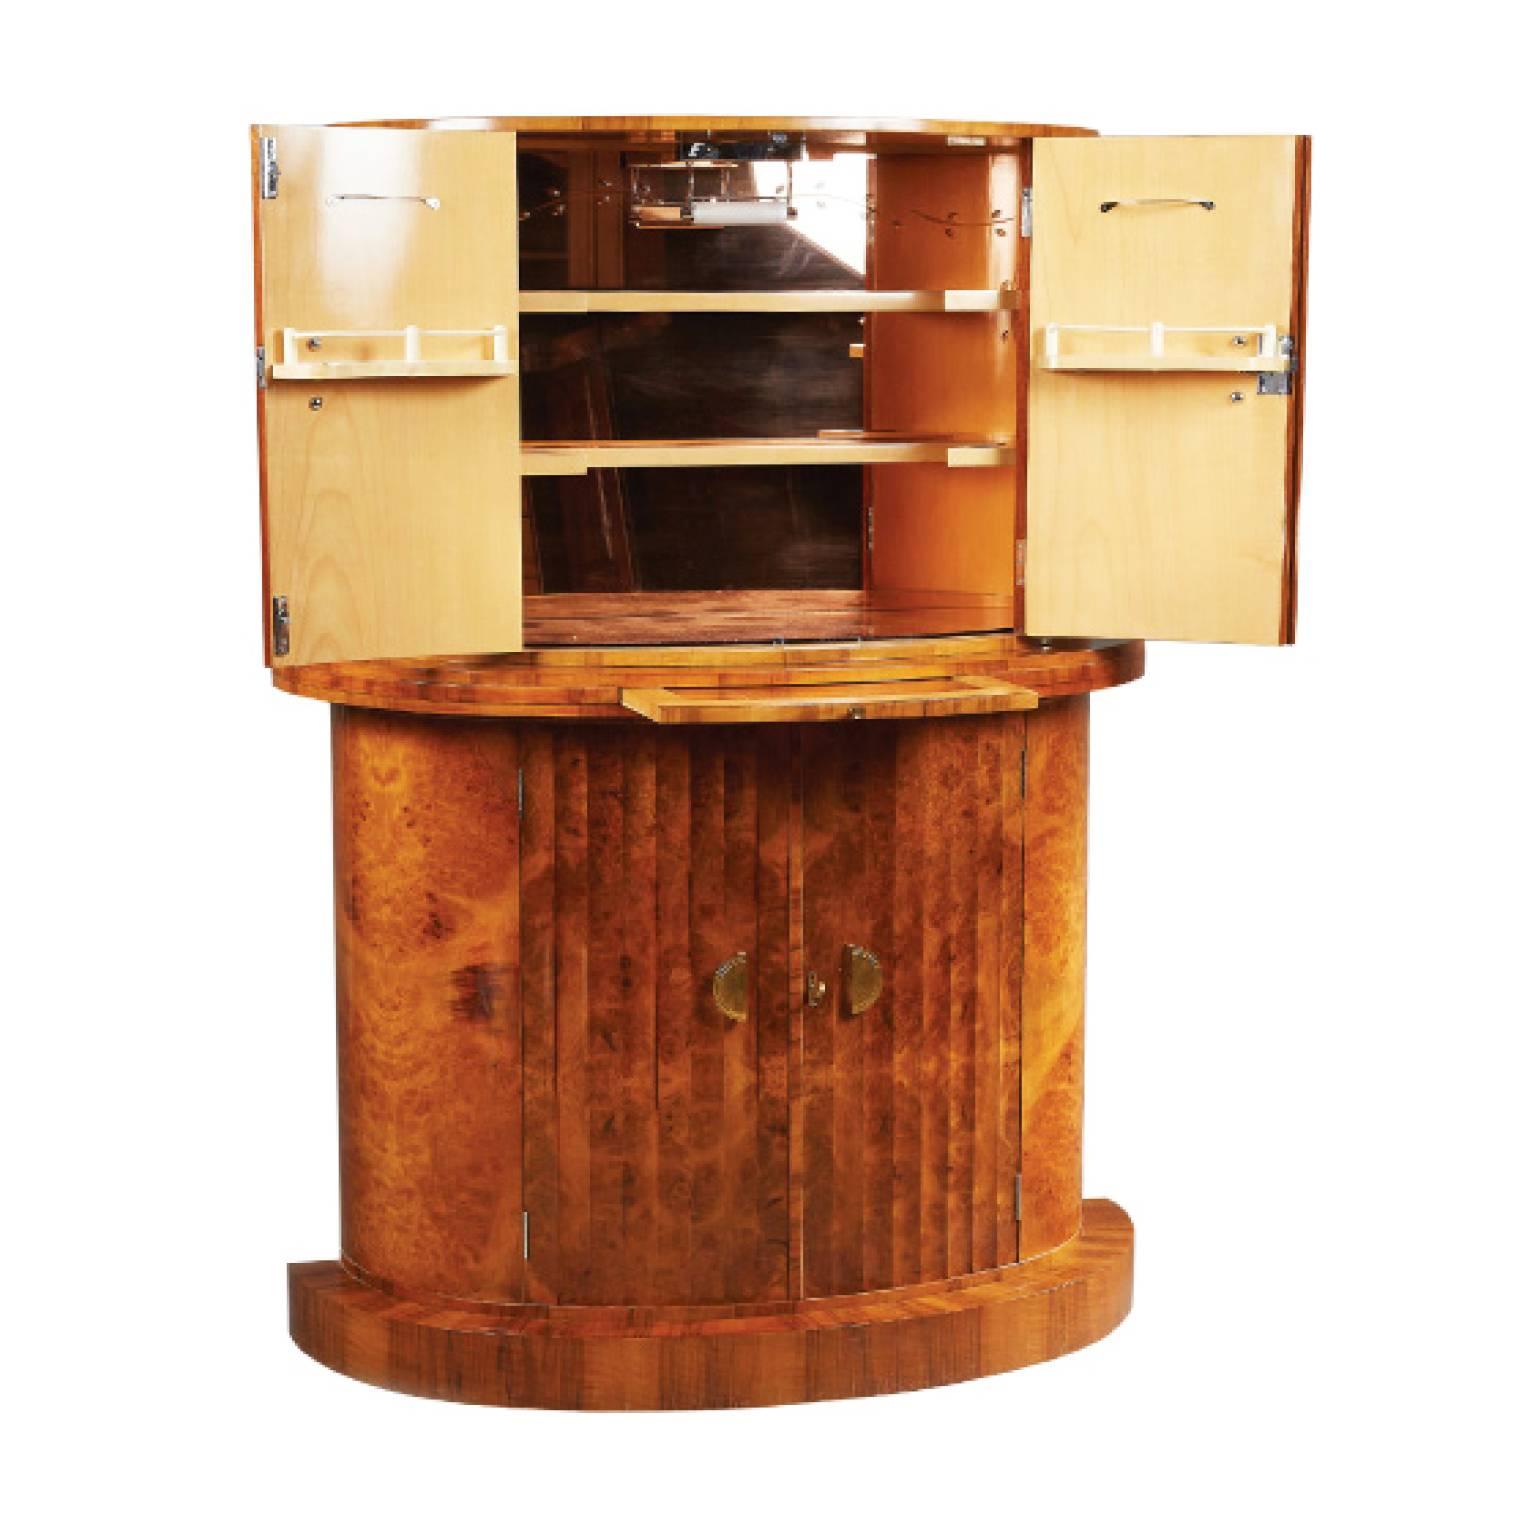 Beautiful tall demilune bar in elm burl veneer with fluted doors and original brass hardware. Top cabinet in citron wood opens to mirrored interior with subtle leaf decoration with light at top and shelving for glassware. Mixing plateau pulls out